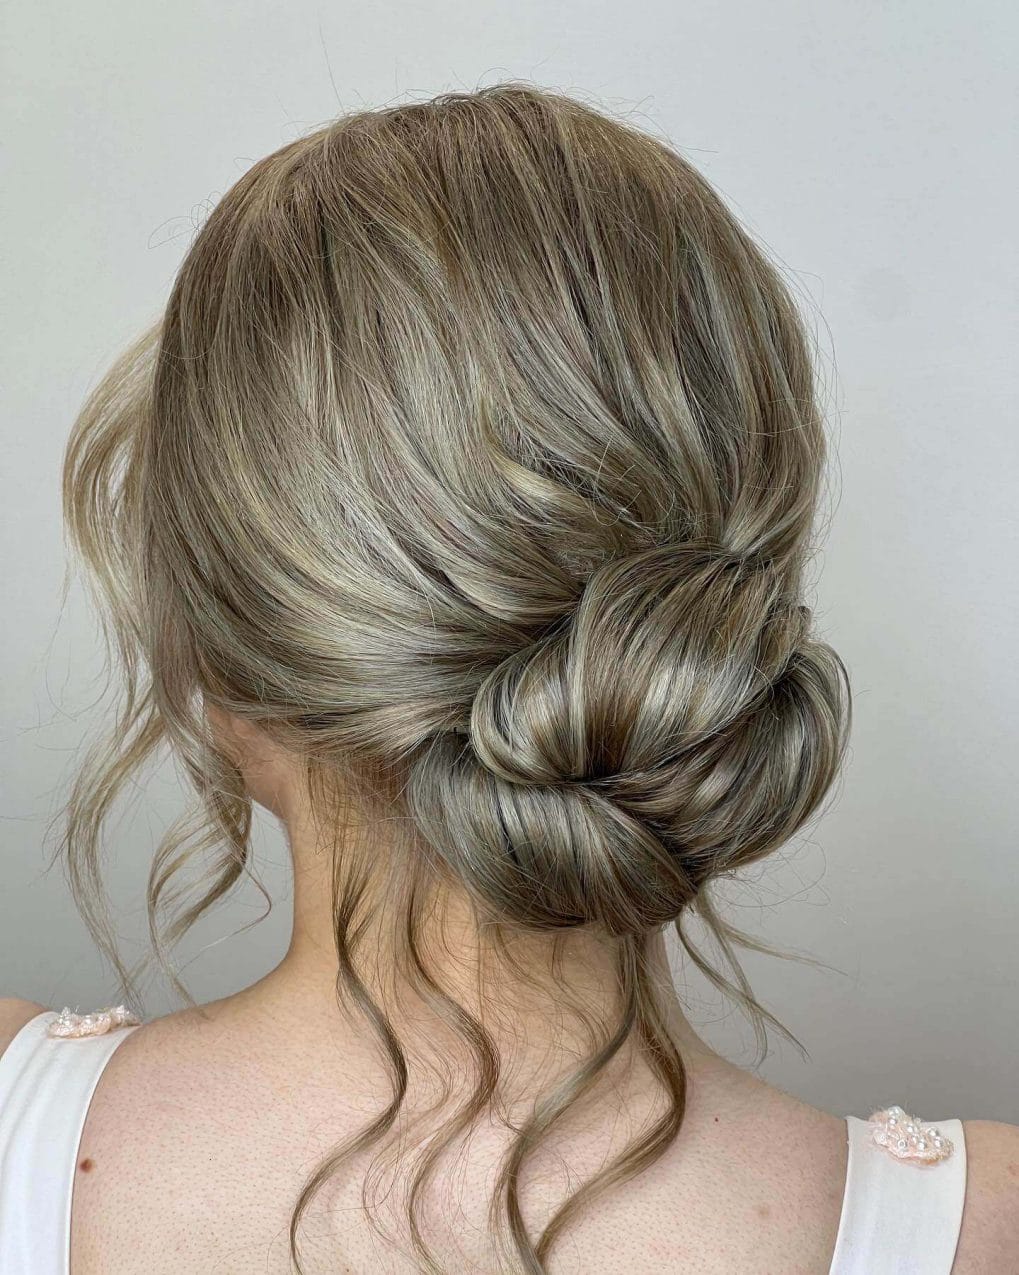 Chic summer wedding braided crown updo with ash tones